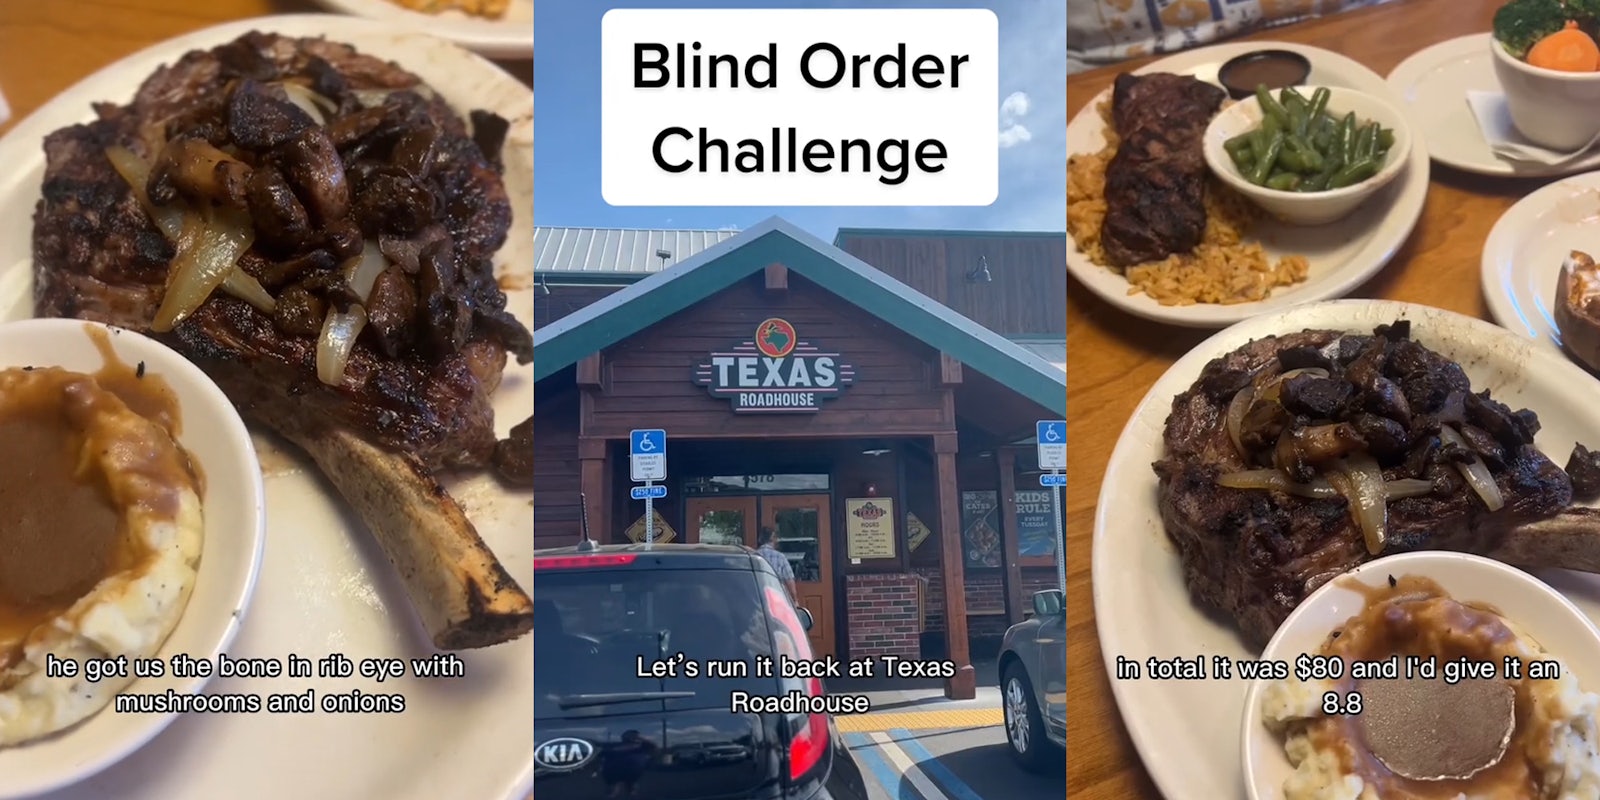 Texas Roadhouse bone in rib eye with caption 'he got us the bone in rib eye with mushrooms and onions' (l) Texas Roadhouse building with sign and caption 'Blind Order Challenge let's run it back at Texas Roadhouse' (c) Texas Roadhouse food with caption 'in total it was $80 and I'd give it an 8.8' (r)